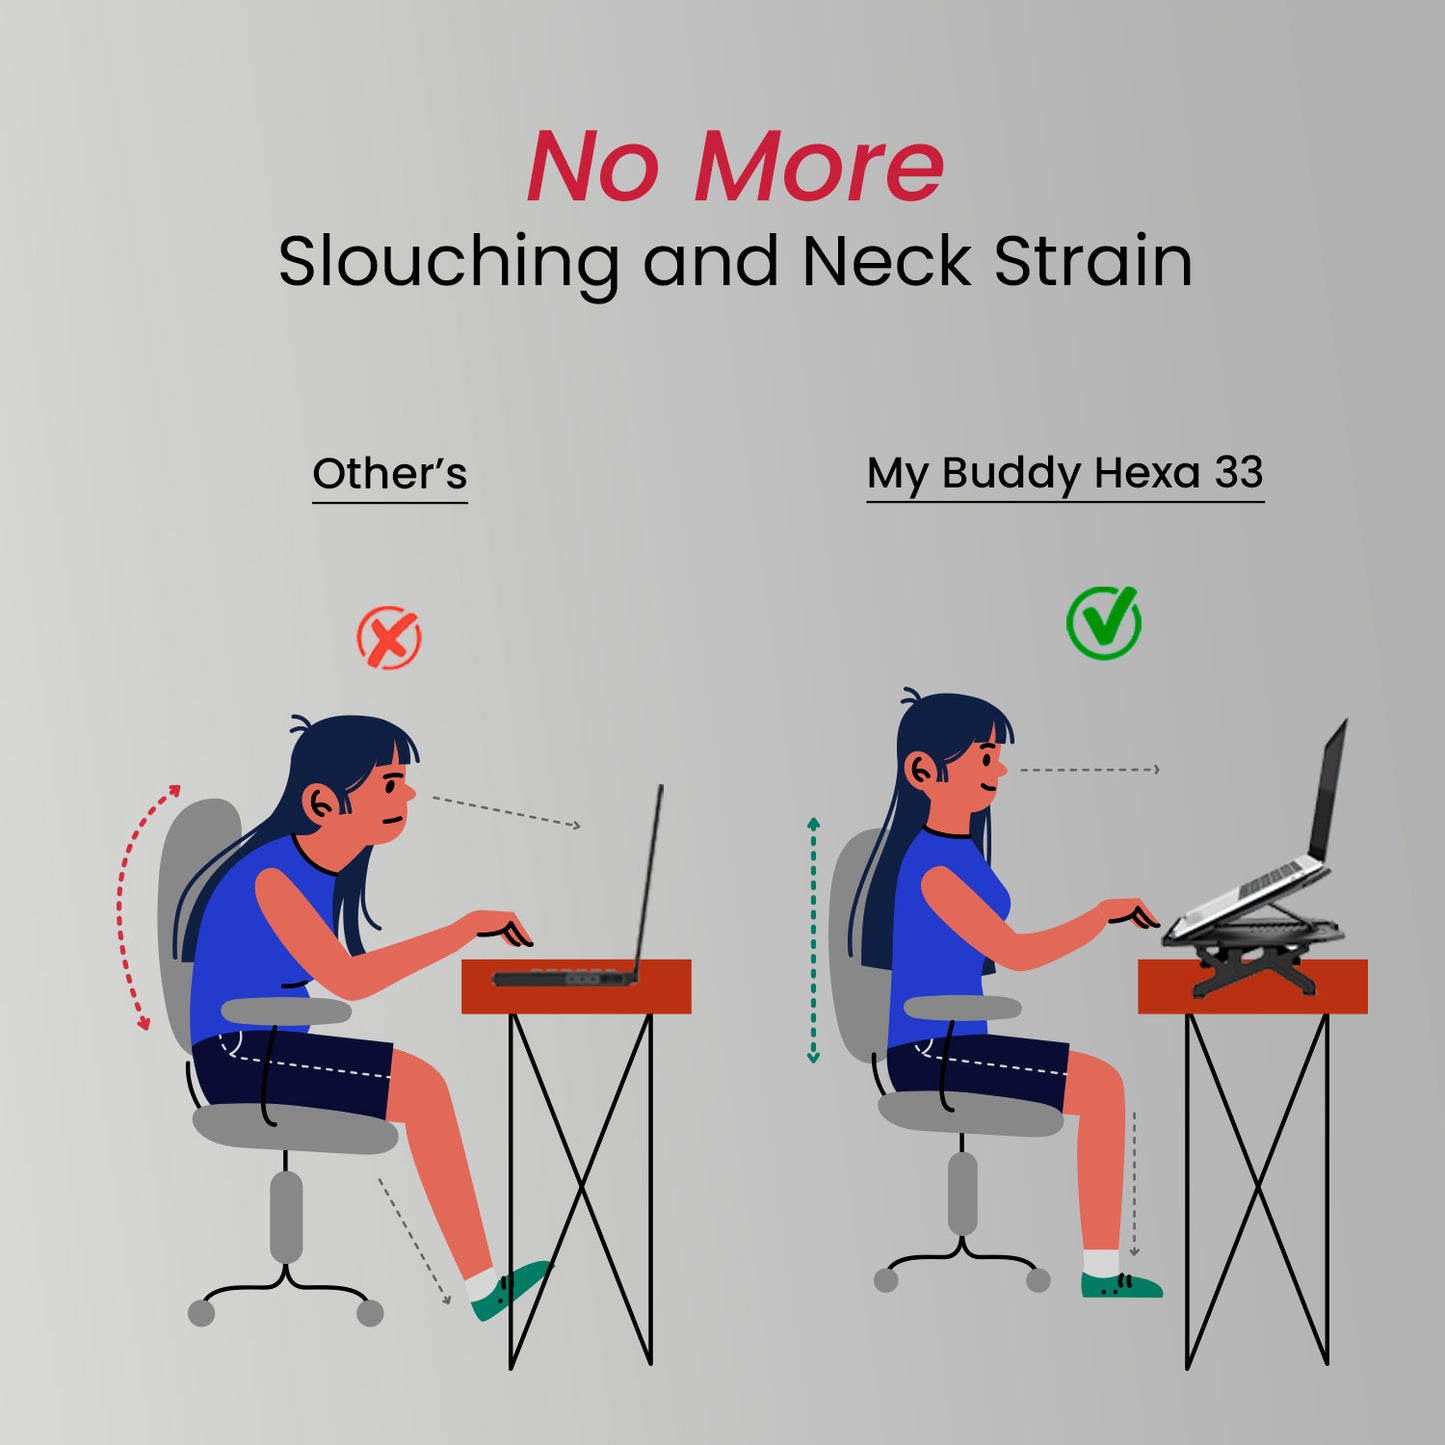 Blue Portronics My Buddy Hexa 33: Portable Laptop Stand for better posture